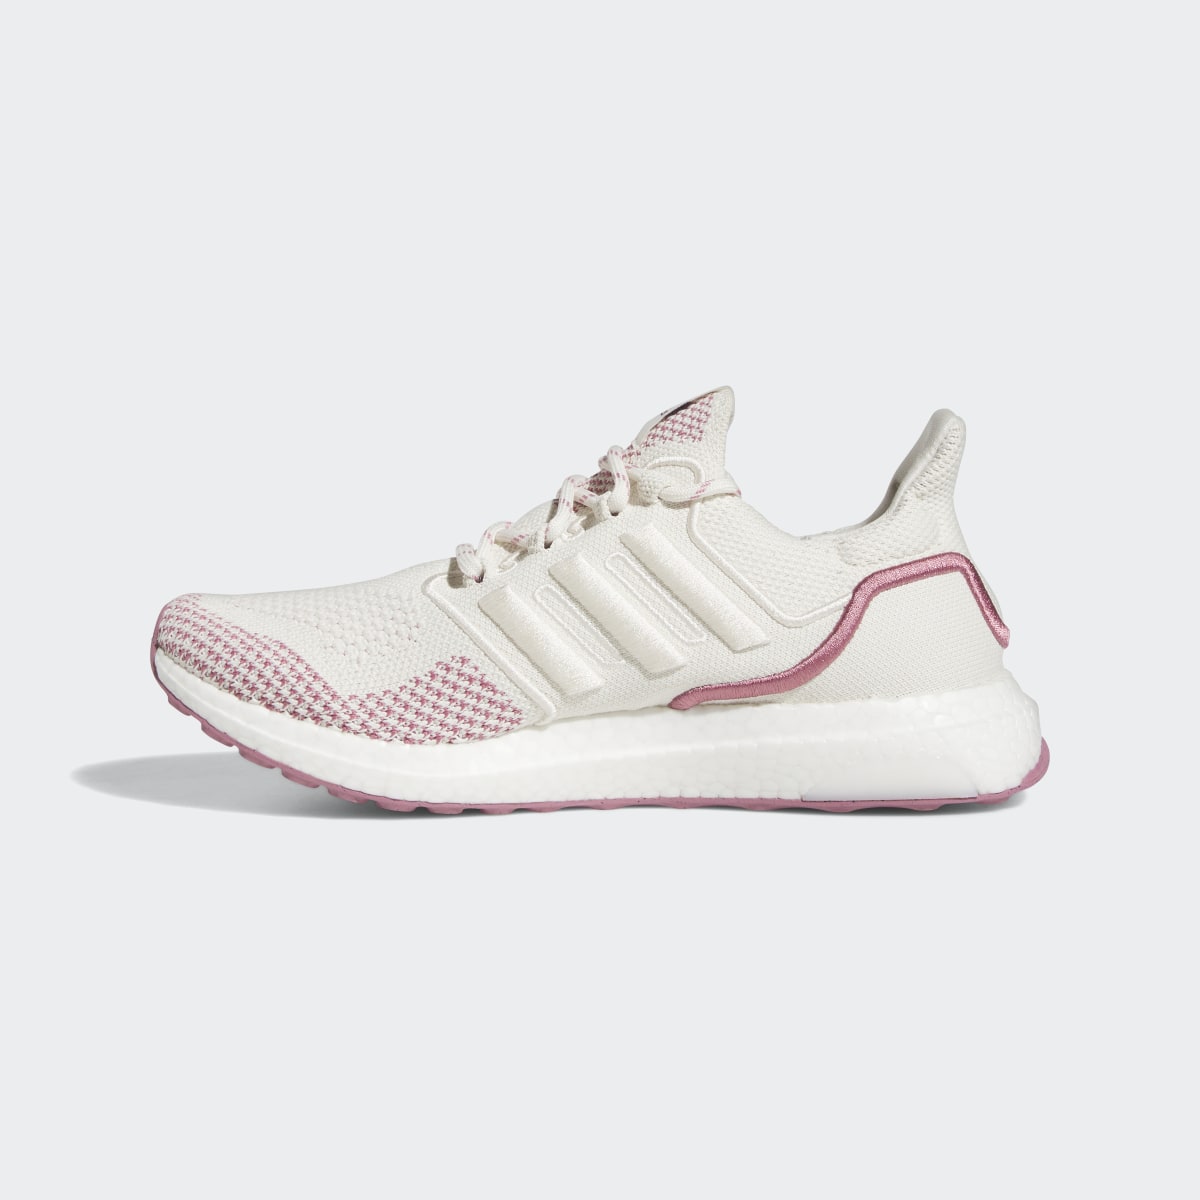 Adidas Ultraboost 1 LCFP Shoes. 10